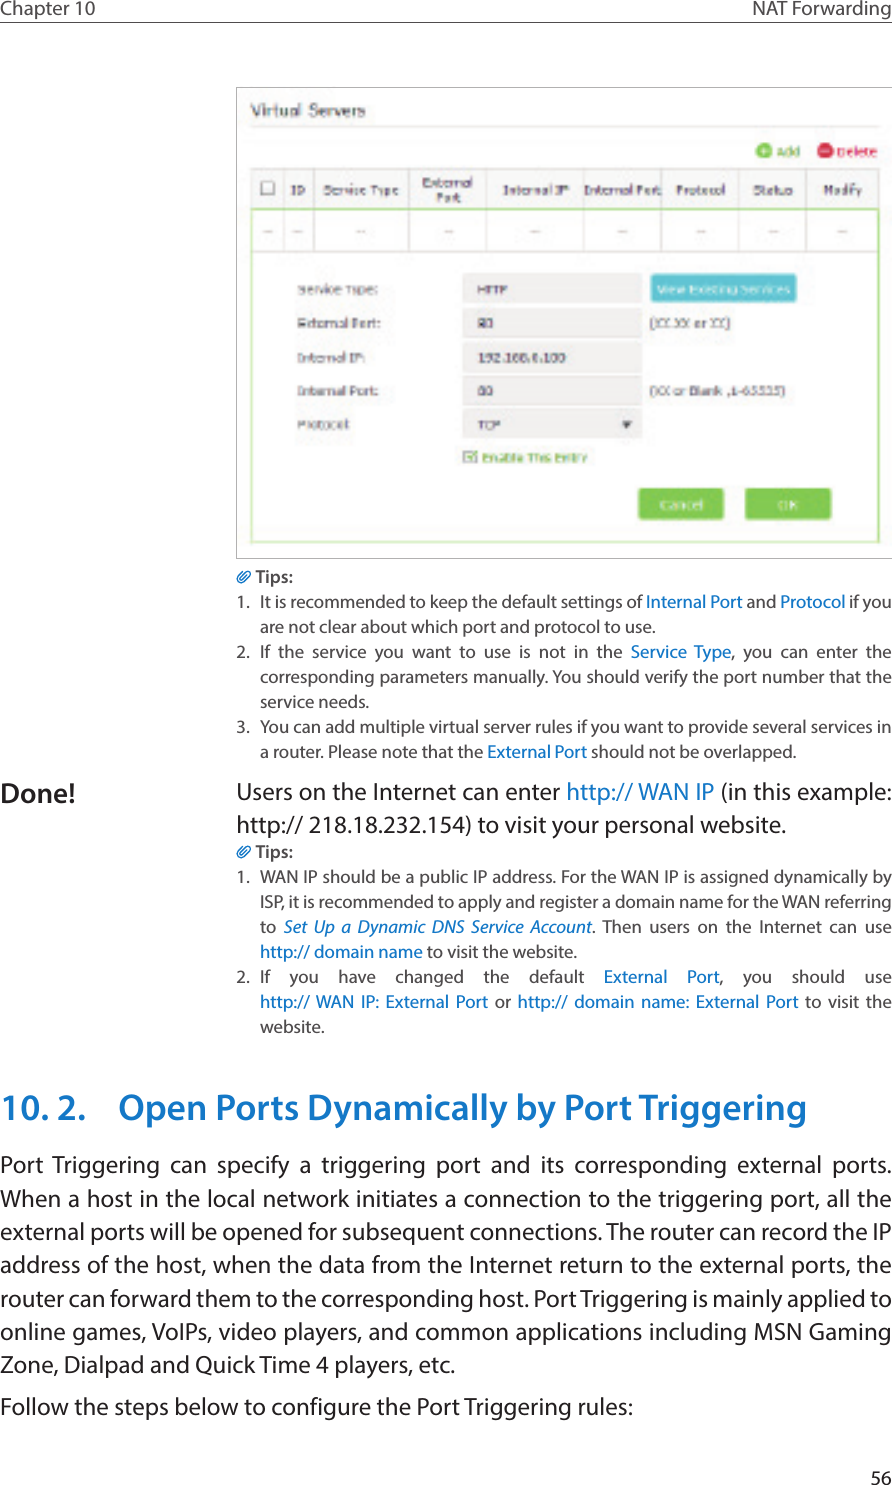 56Chapter 10 NAT ForwardingTips:1.  It is recommended to keep the default settings of Internal Port and Protocol if you are not clear about which port and protocol to use.2.  If the service you want to use is not in the Service Type, you can enter the corresponding parameters manually. You should verify the port number that the service needs.3.  You can add multiple virtual server rules if you want to provide several services in a router. Please note that the External Port should not be overlapped.Users on the Internet can enter http:// WAN IP (in this example: http:// 218.18.232.154) to visit your personal website.Tips:1.  WAN IP should be a public IP address. For the WAN IP is assigned dynamically by ISP, it is recommended to apply and register a domain name for the WAN referring to  Set Up a Dynamic DNS Service Account. Then users on the Internet can use  http:// domain name to visit the website.2.  If you have changed the default External Port, you should use  http:// WAN IP: External Port or http:// domain name: External Port to visit the website.10. 2.  Open Ports Dynamically by Port TriggeringPort Triggering can specify a triggering port and its corresponding external ports. When a host in the local network initiates a connection to the triggering port, all the external ports will be opened for subsequent connections. The router can record the IP address of the host, when the data from the Internet return to the external ports, the router can forward them to the corresponding host. Port Triggering is mainly applied to online games, VoIPs, video players, and common applications including MSN Gaming Zone, Dialpad and Quick Time 4 players, etc. Follow the steps below to configure the Port Triggering rules:Done!